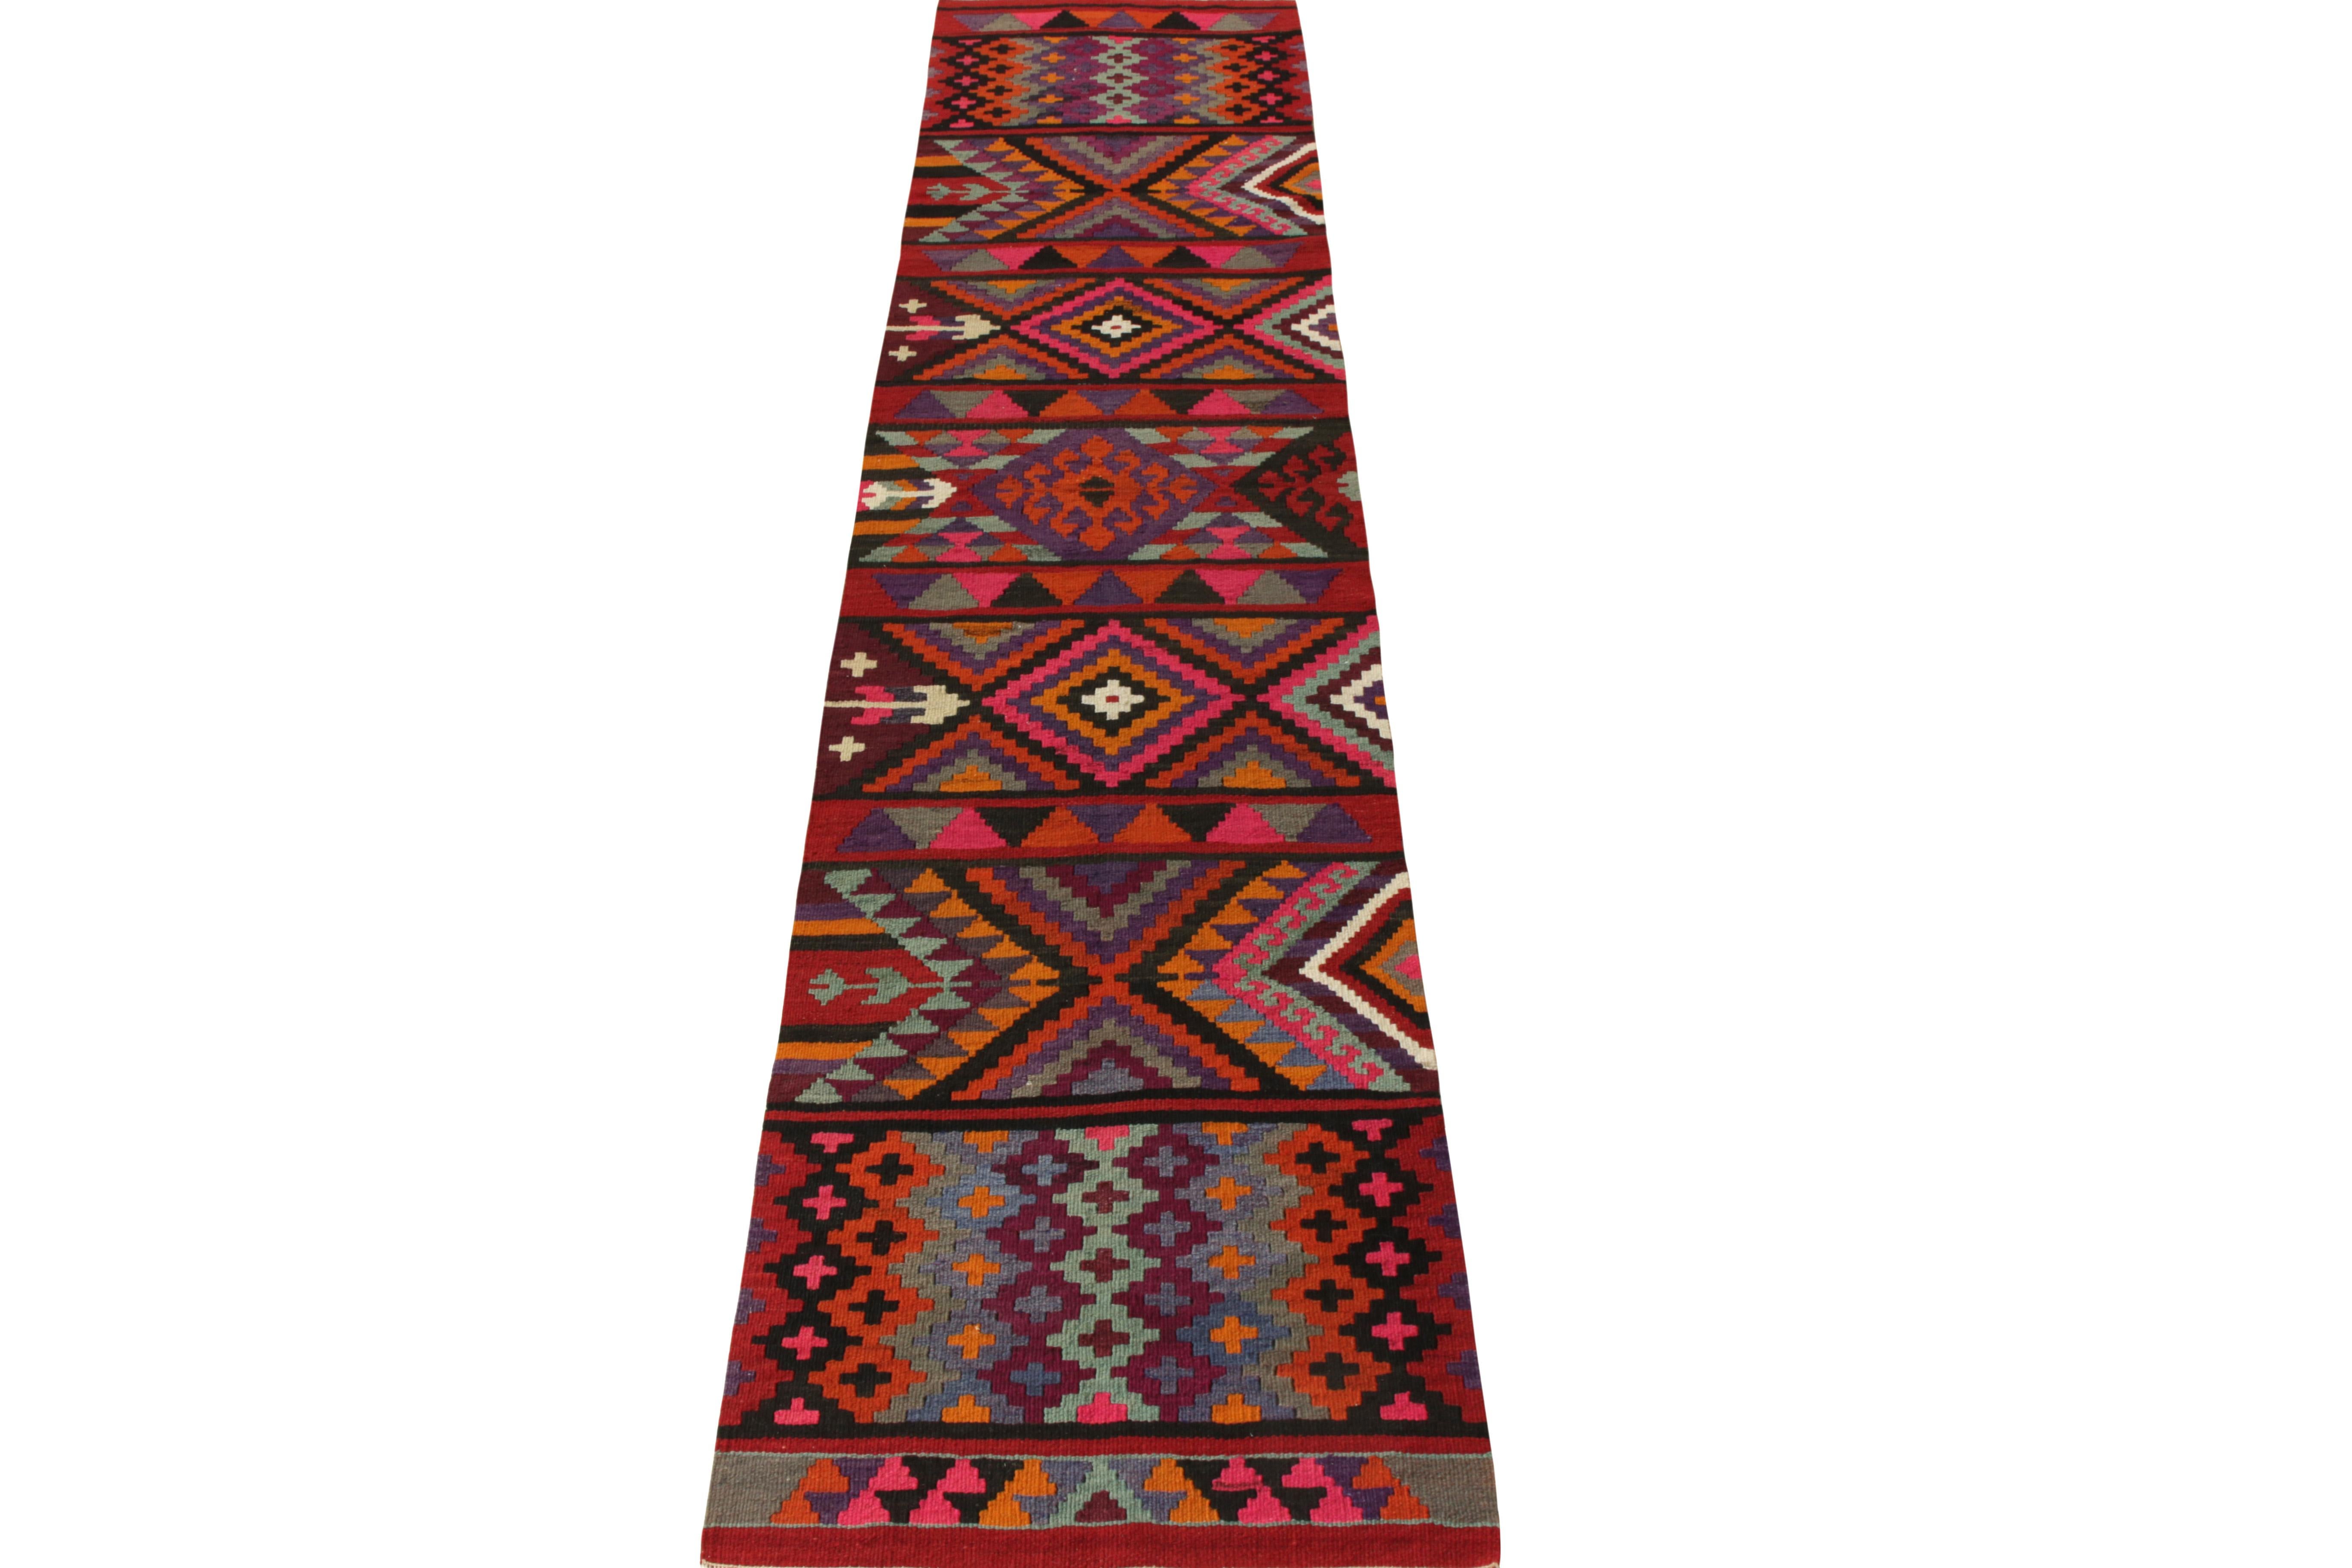 Dextrously woven in wool circa 1950-1960, this 1950s vintage runner piece hails from Rug & Kilim’s coveted Kilim & Flat Weave collection. The Kilim runner spans across a 2x12 geometric scale with a design suspected of East European tribal